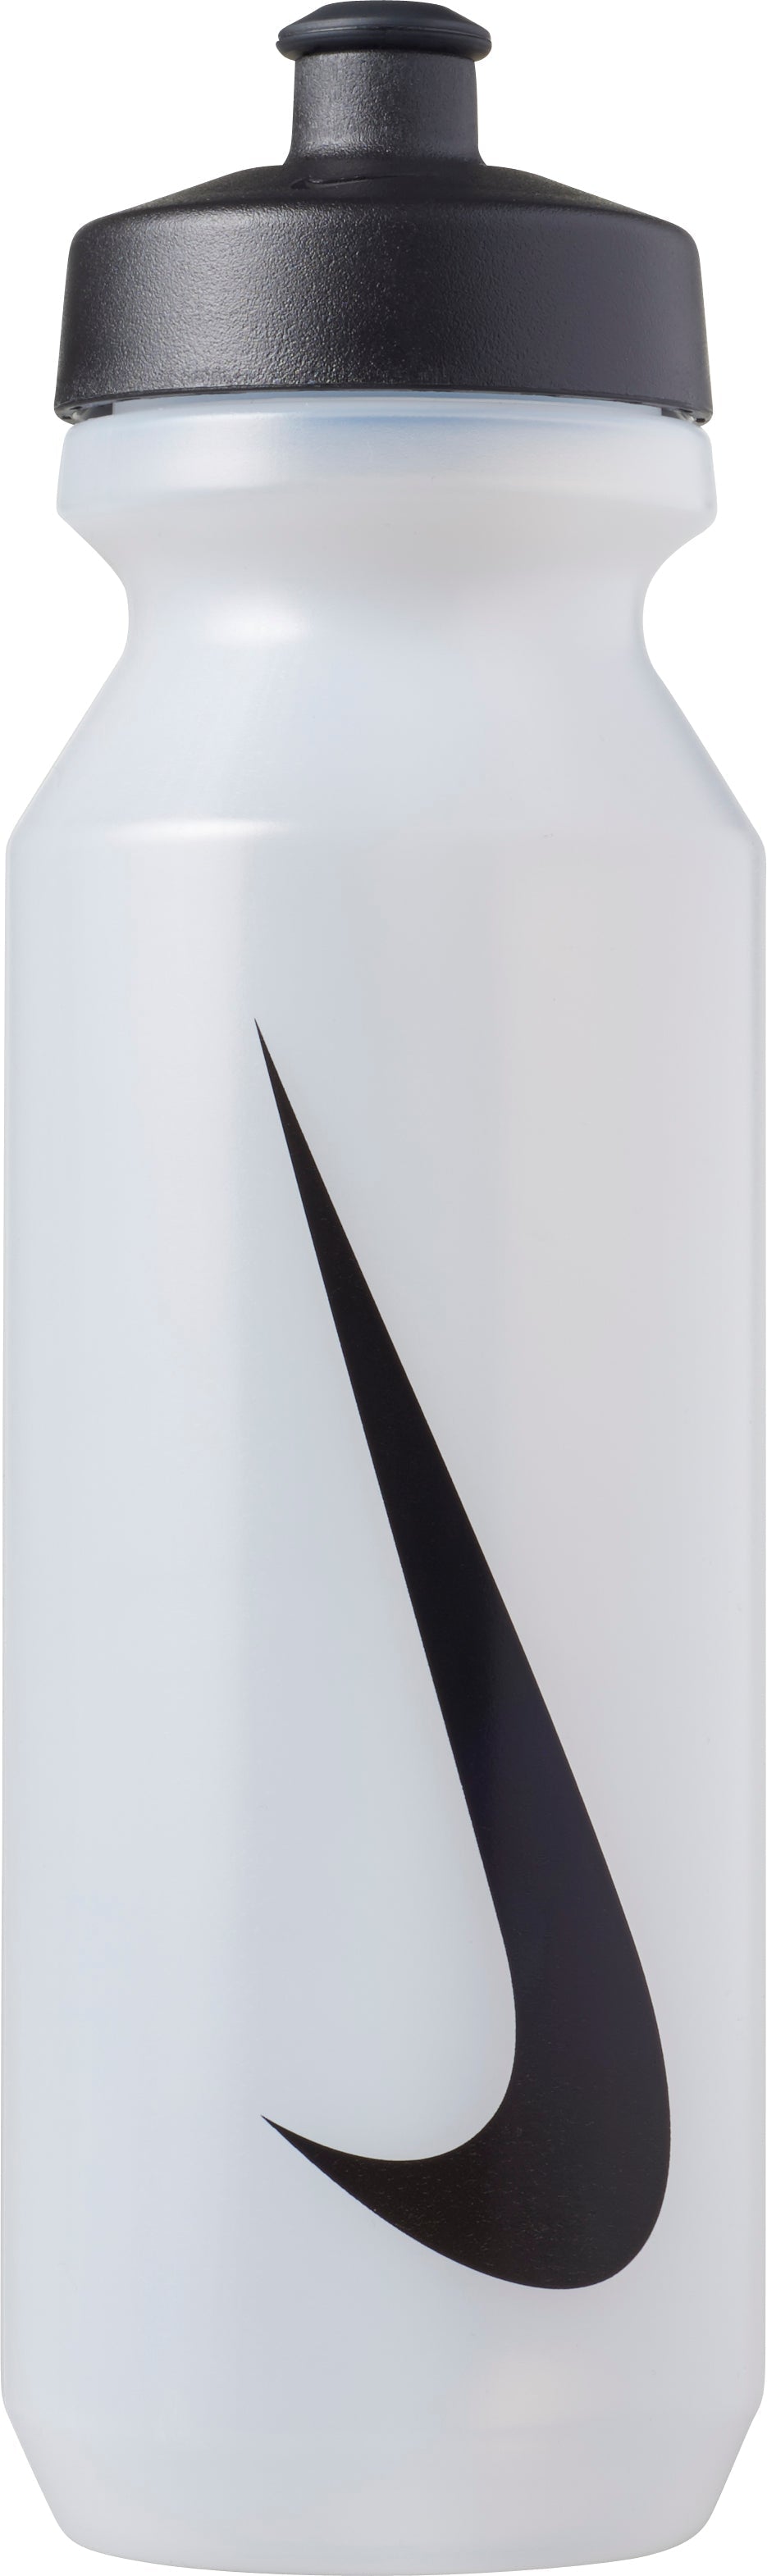 NIKE Big Mouth Bottle 2.0 32 OZ Graphic-Sports Replay - Sports Excellence-Sports Replay - Sports Excellence